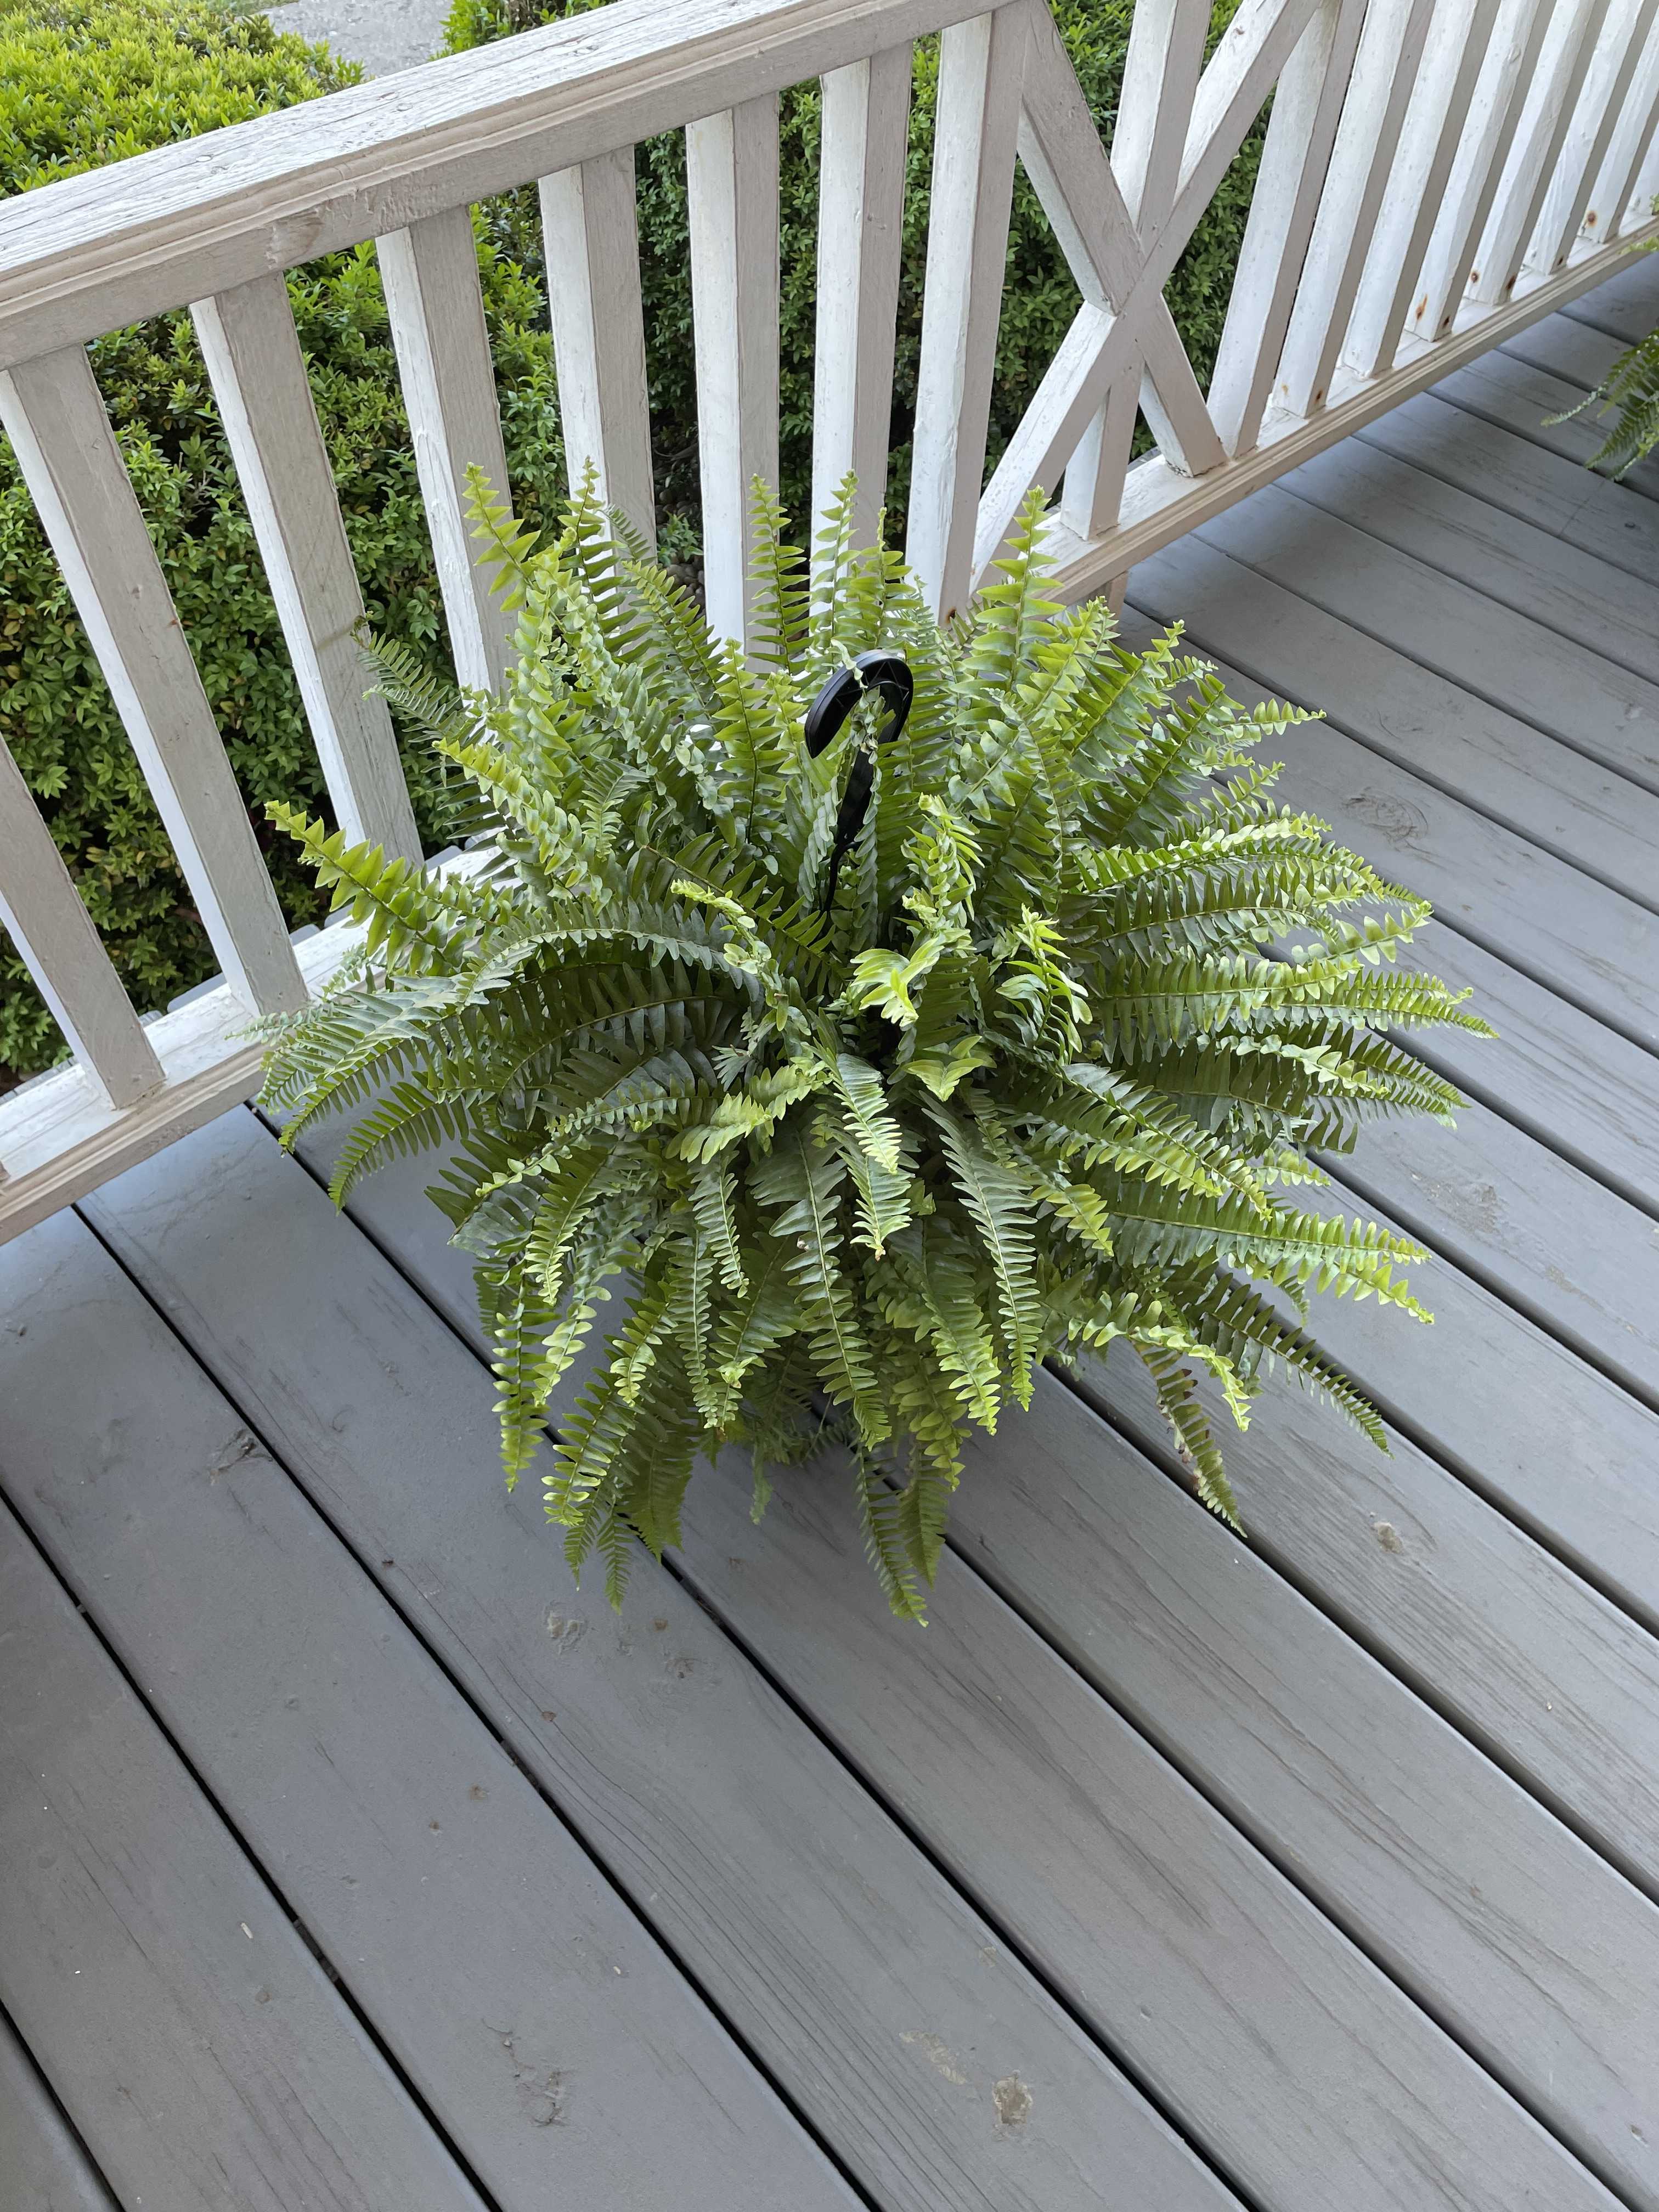 Hanging Fern Basket - A Most beautiful lush green fern, in a hanging basket. A very thoughtful gift. Hang the basket in bright, indirect light if kept indoors, or partial to full shade outdoors. Perfect for adding to a peaceful porch sitting display. 